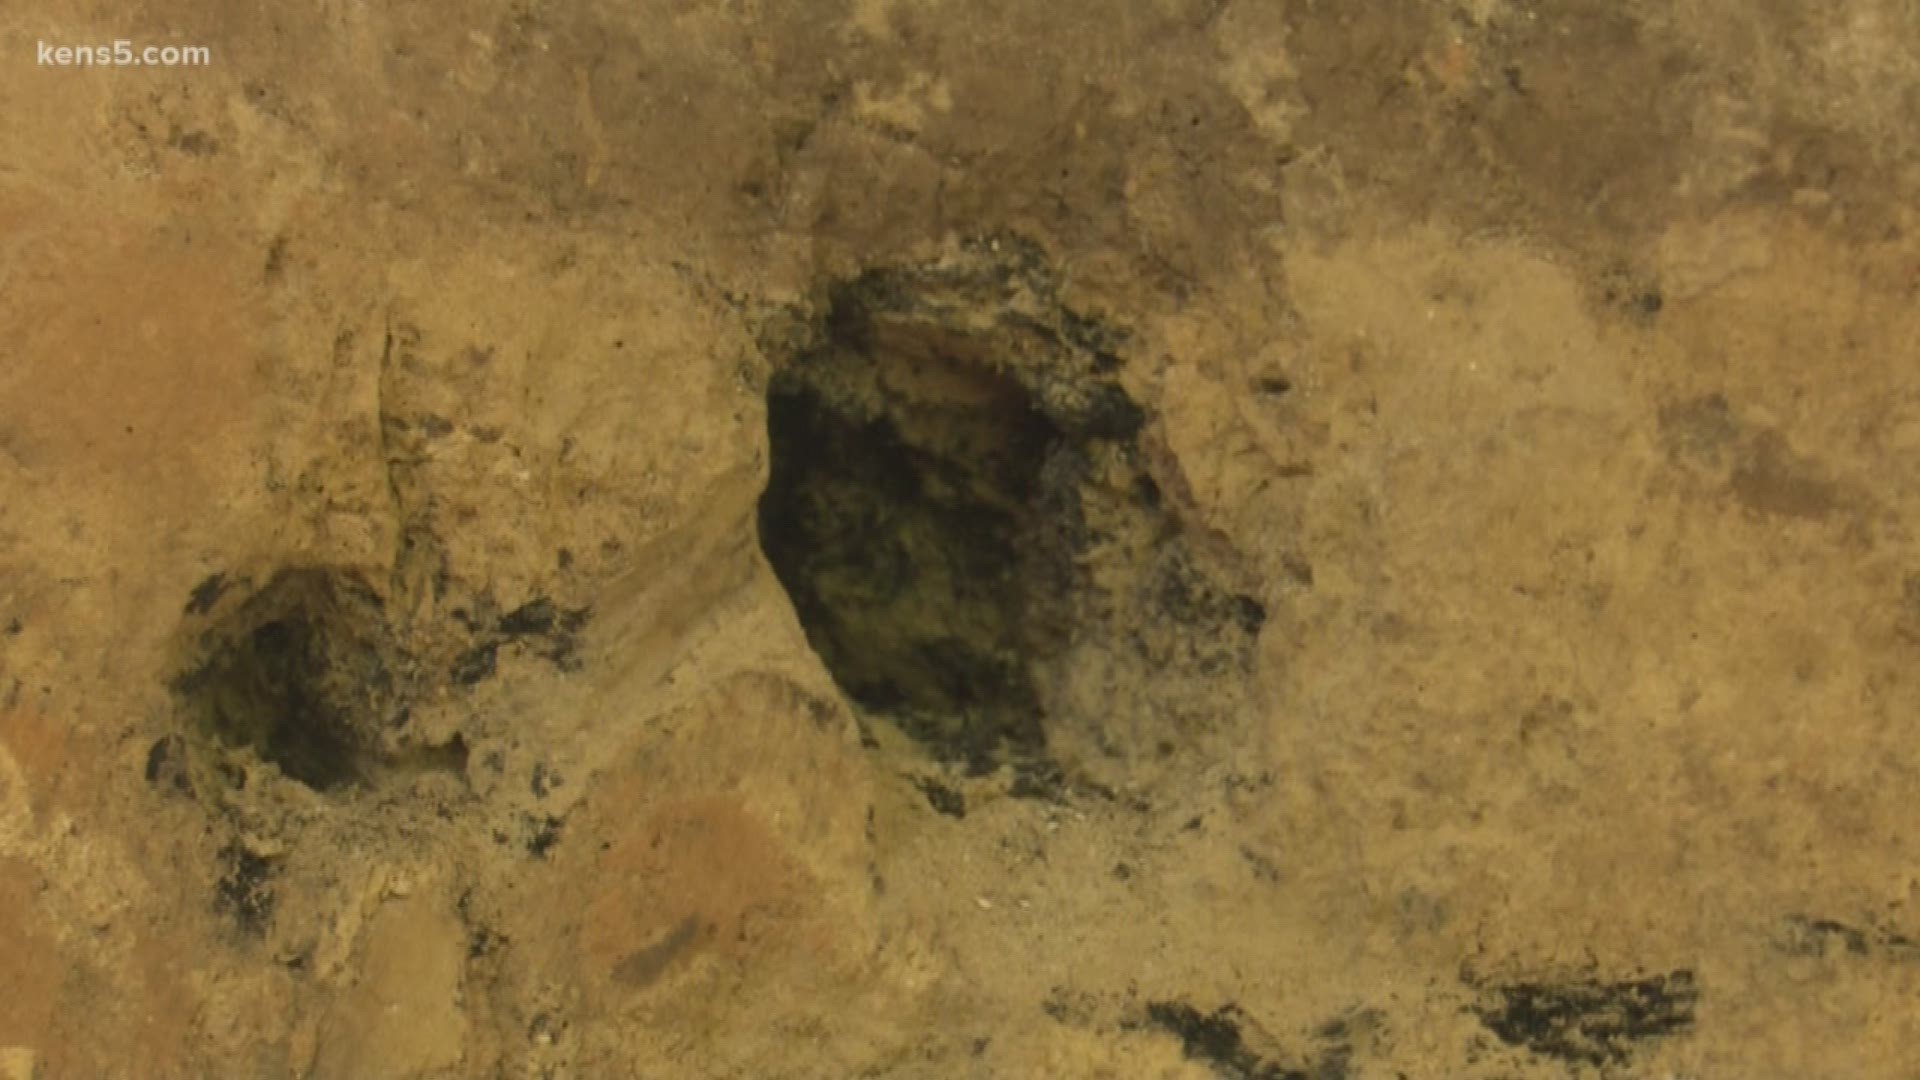 Hidden 14 feet below the surface and tucked under a state highway bridge, archeologists have been working at the ancient site for the past two months.